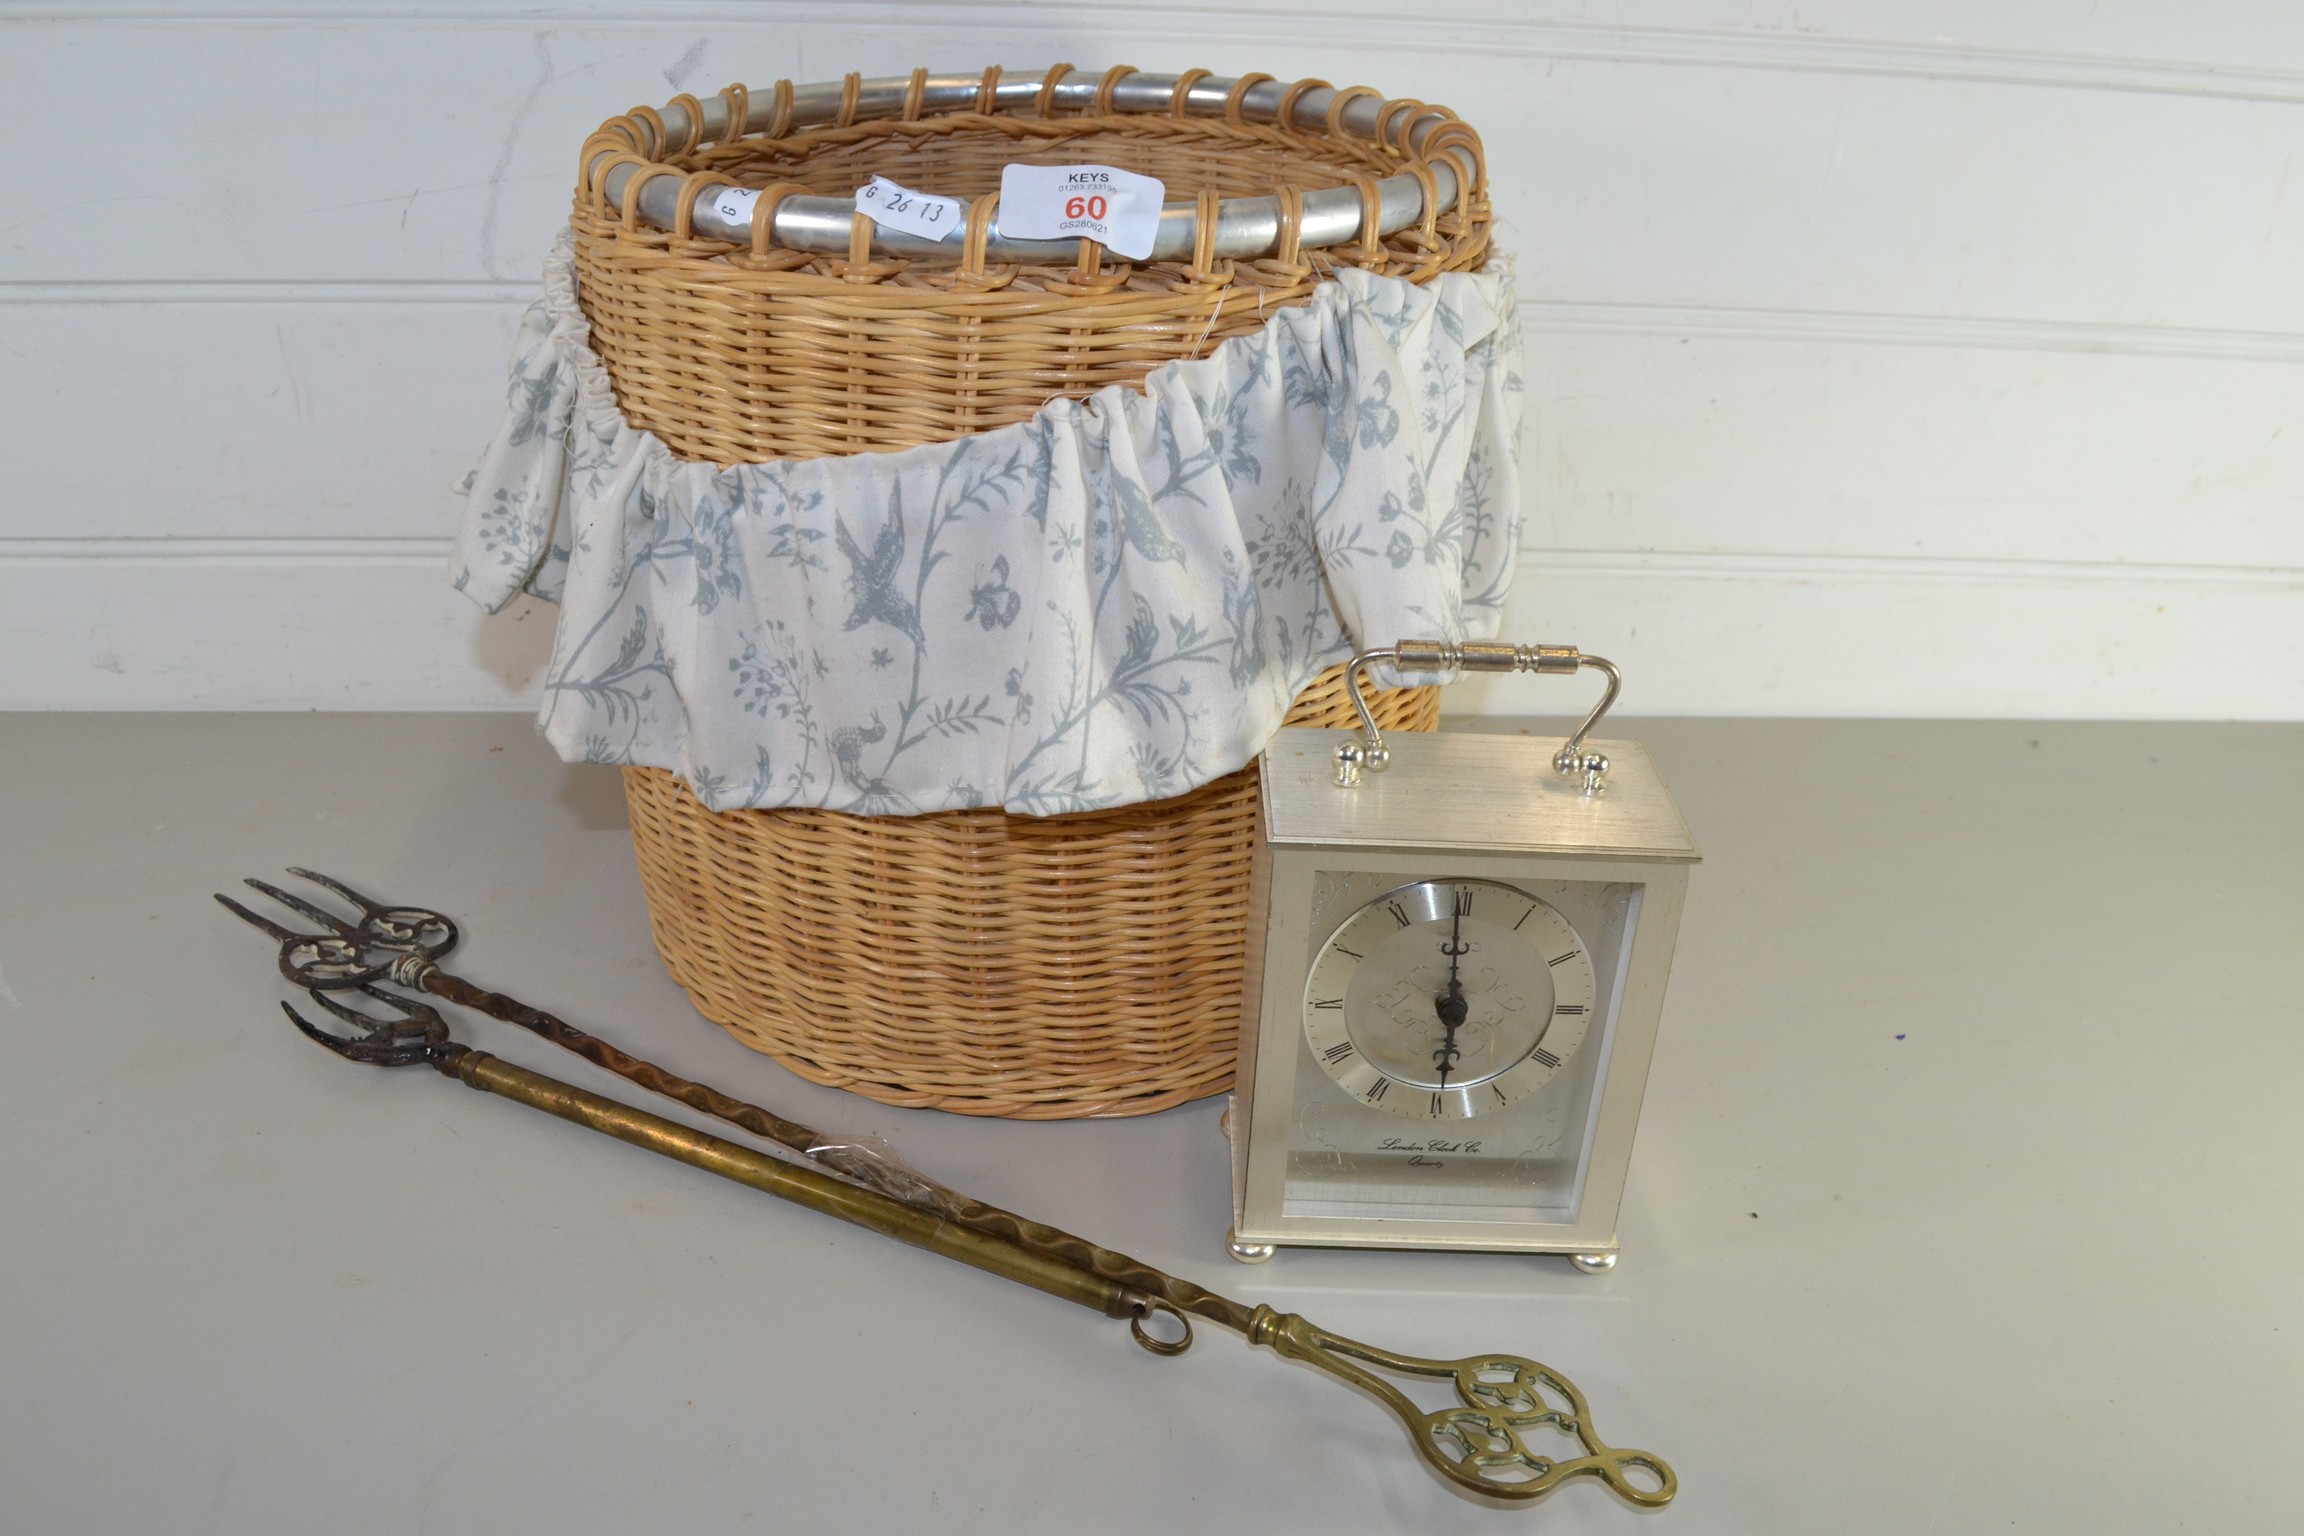 WICKER BASKET CONTAINING A CARRIAGE CLOCK